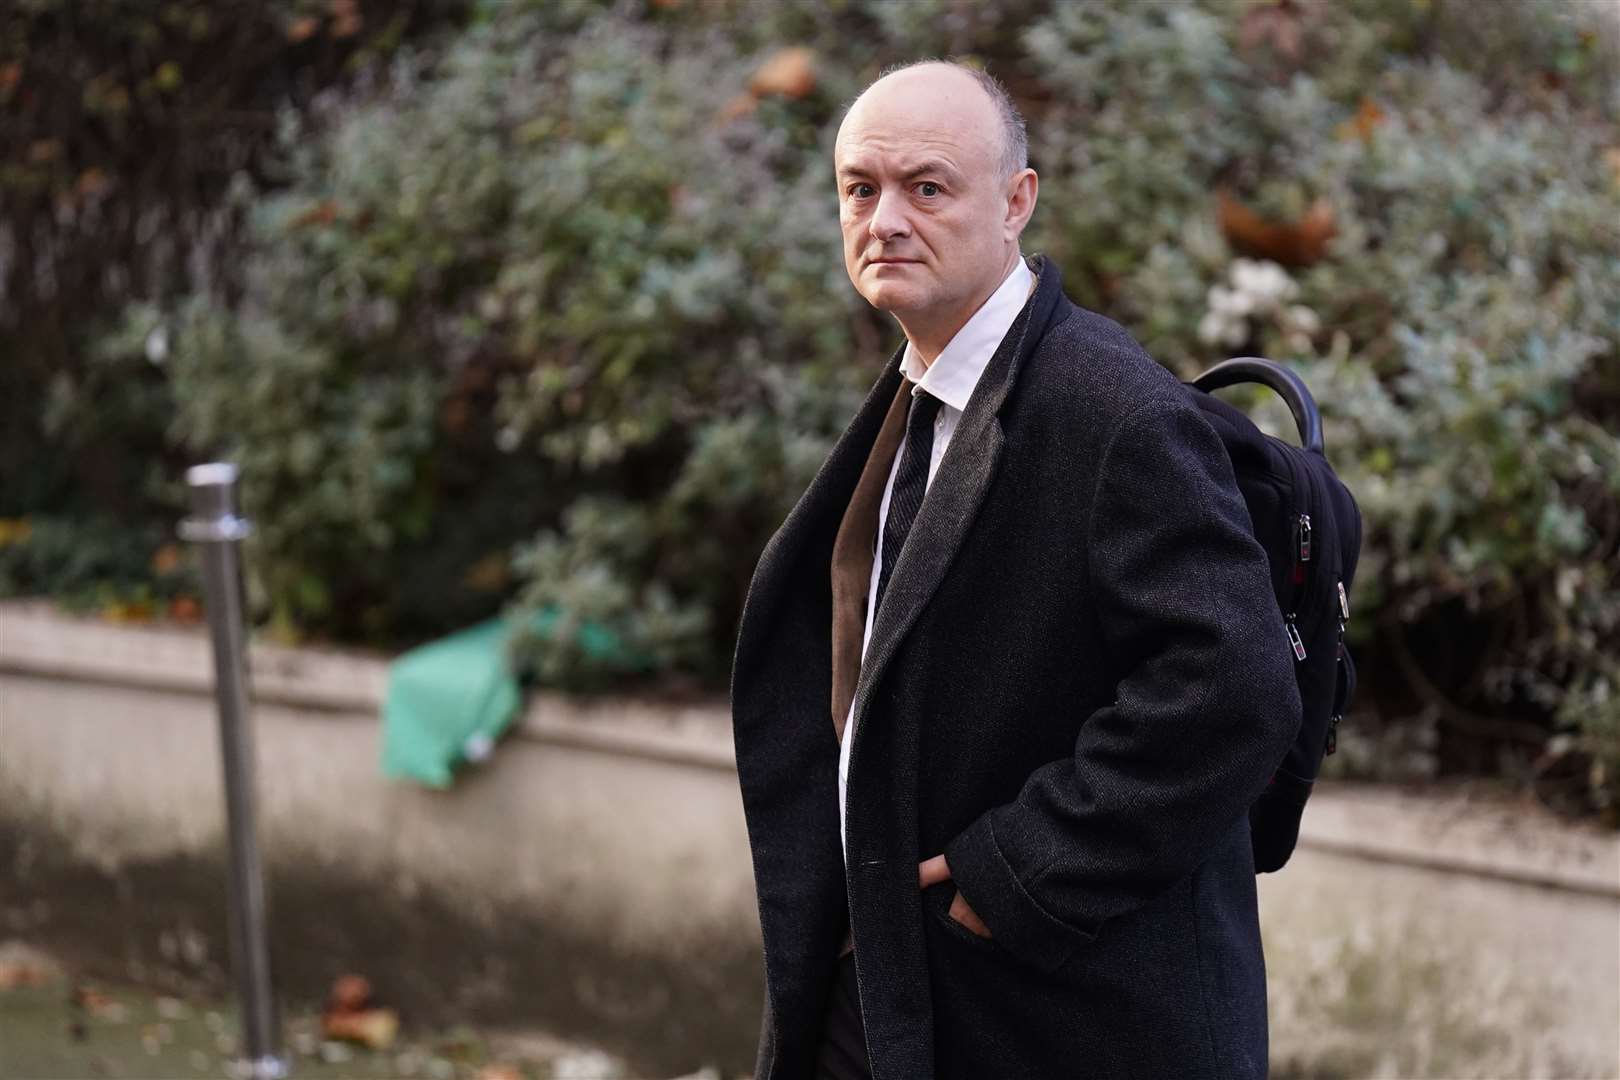 Dominic Cummings arrives to give evidence to the inquiry (James Manning/PA)